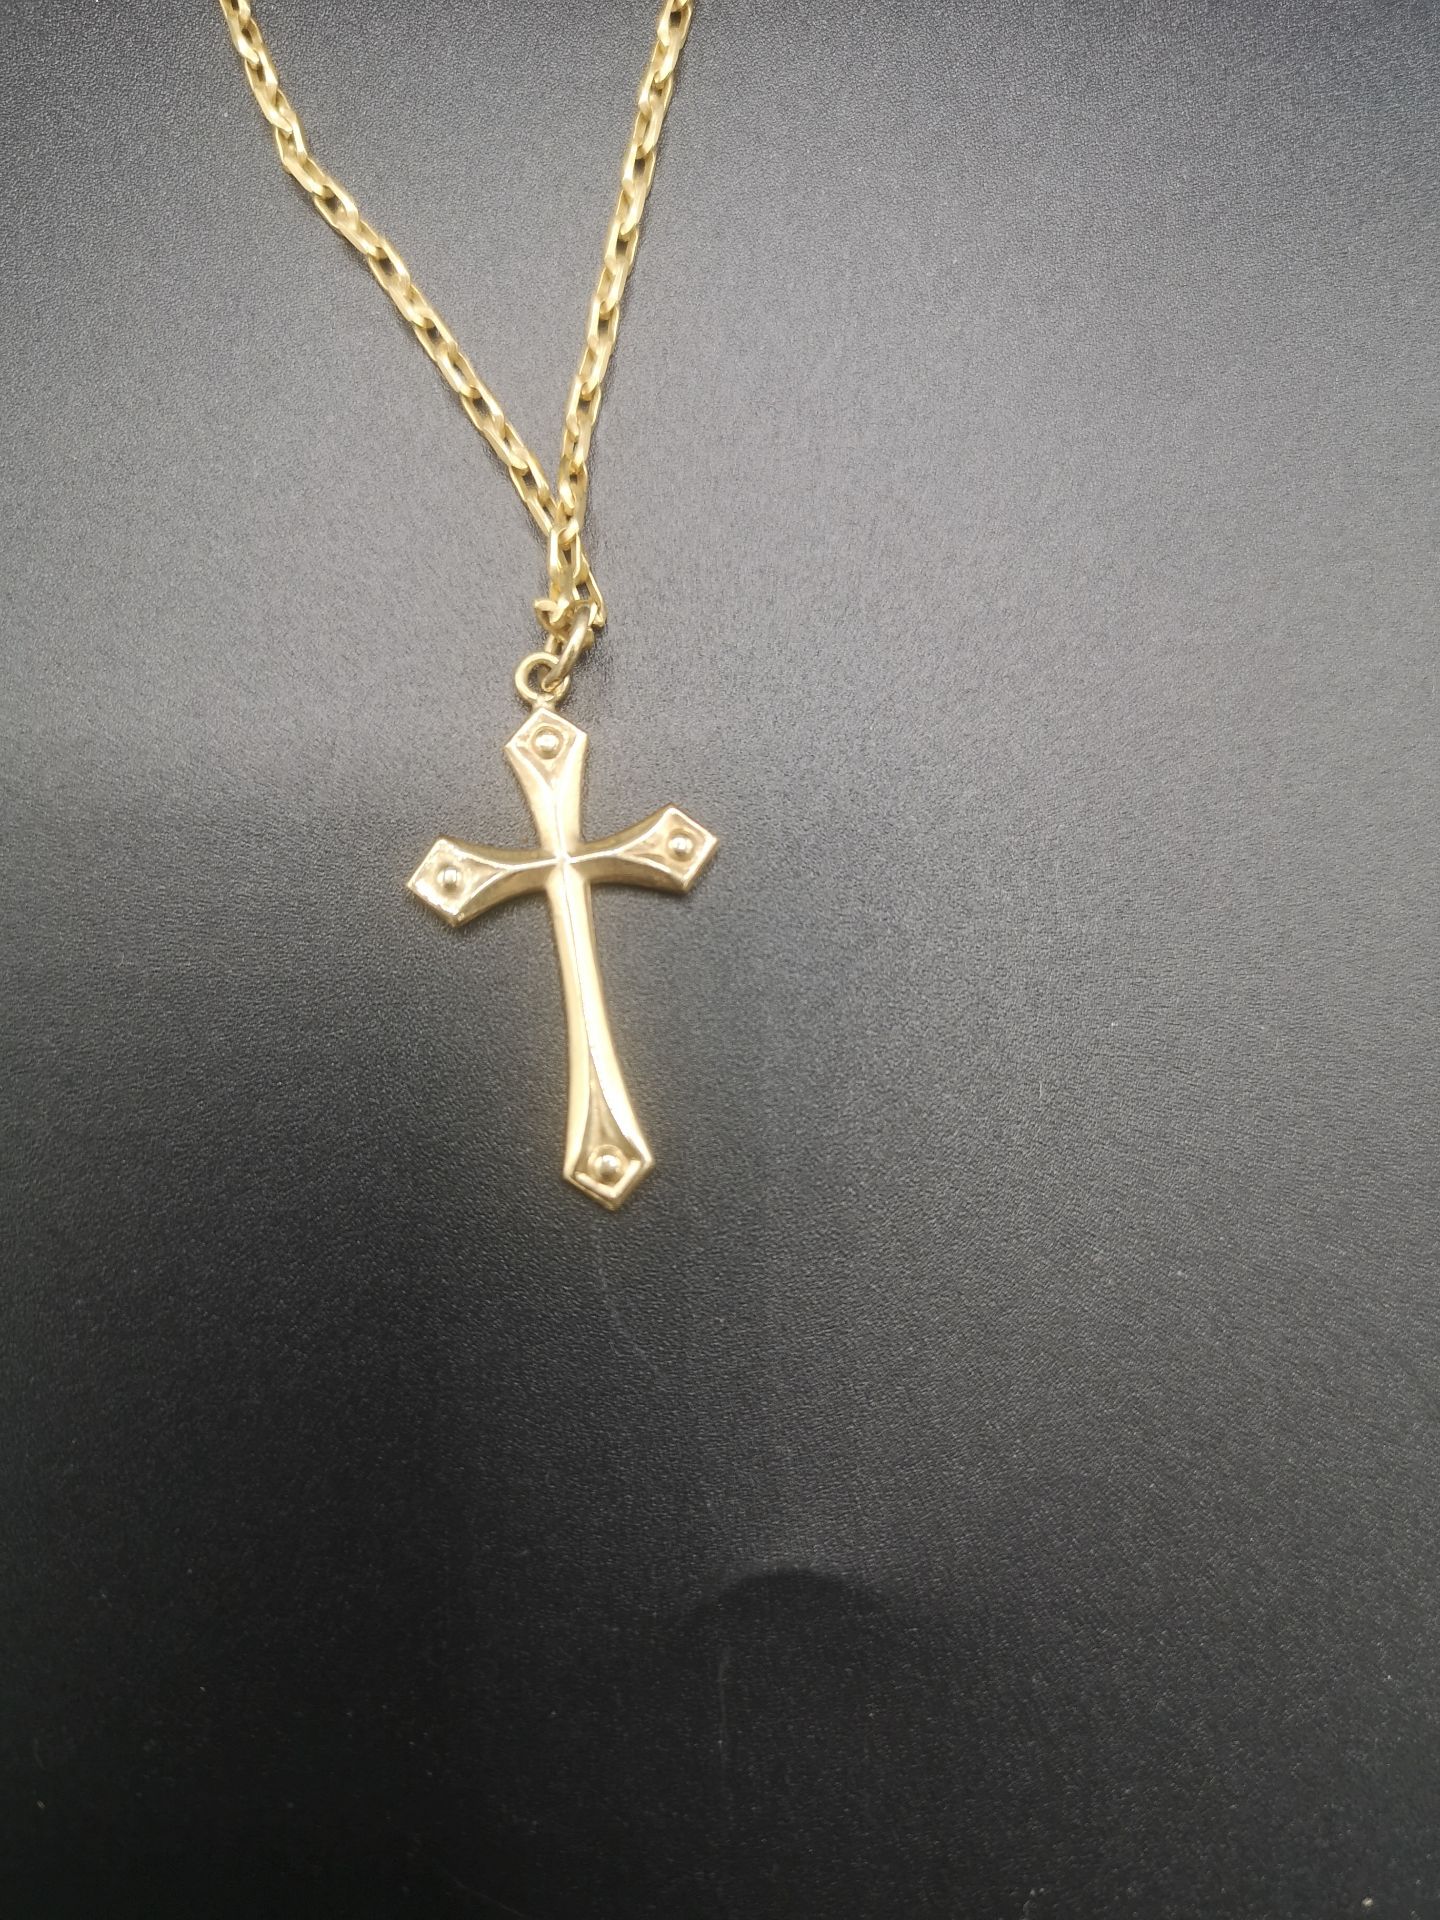 9ct gold necklace and crucifix - Image 4 of 6